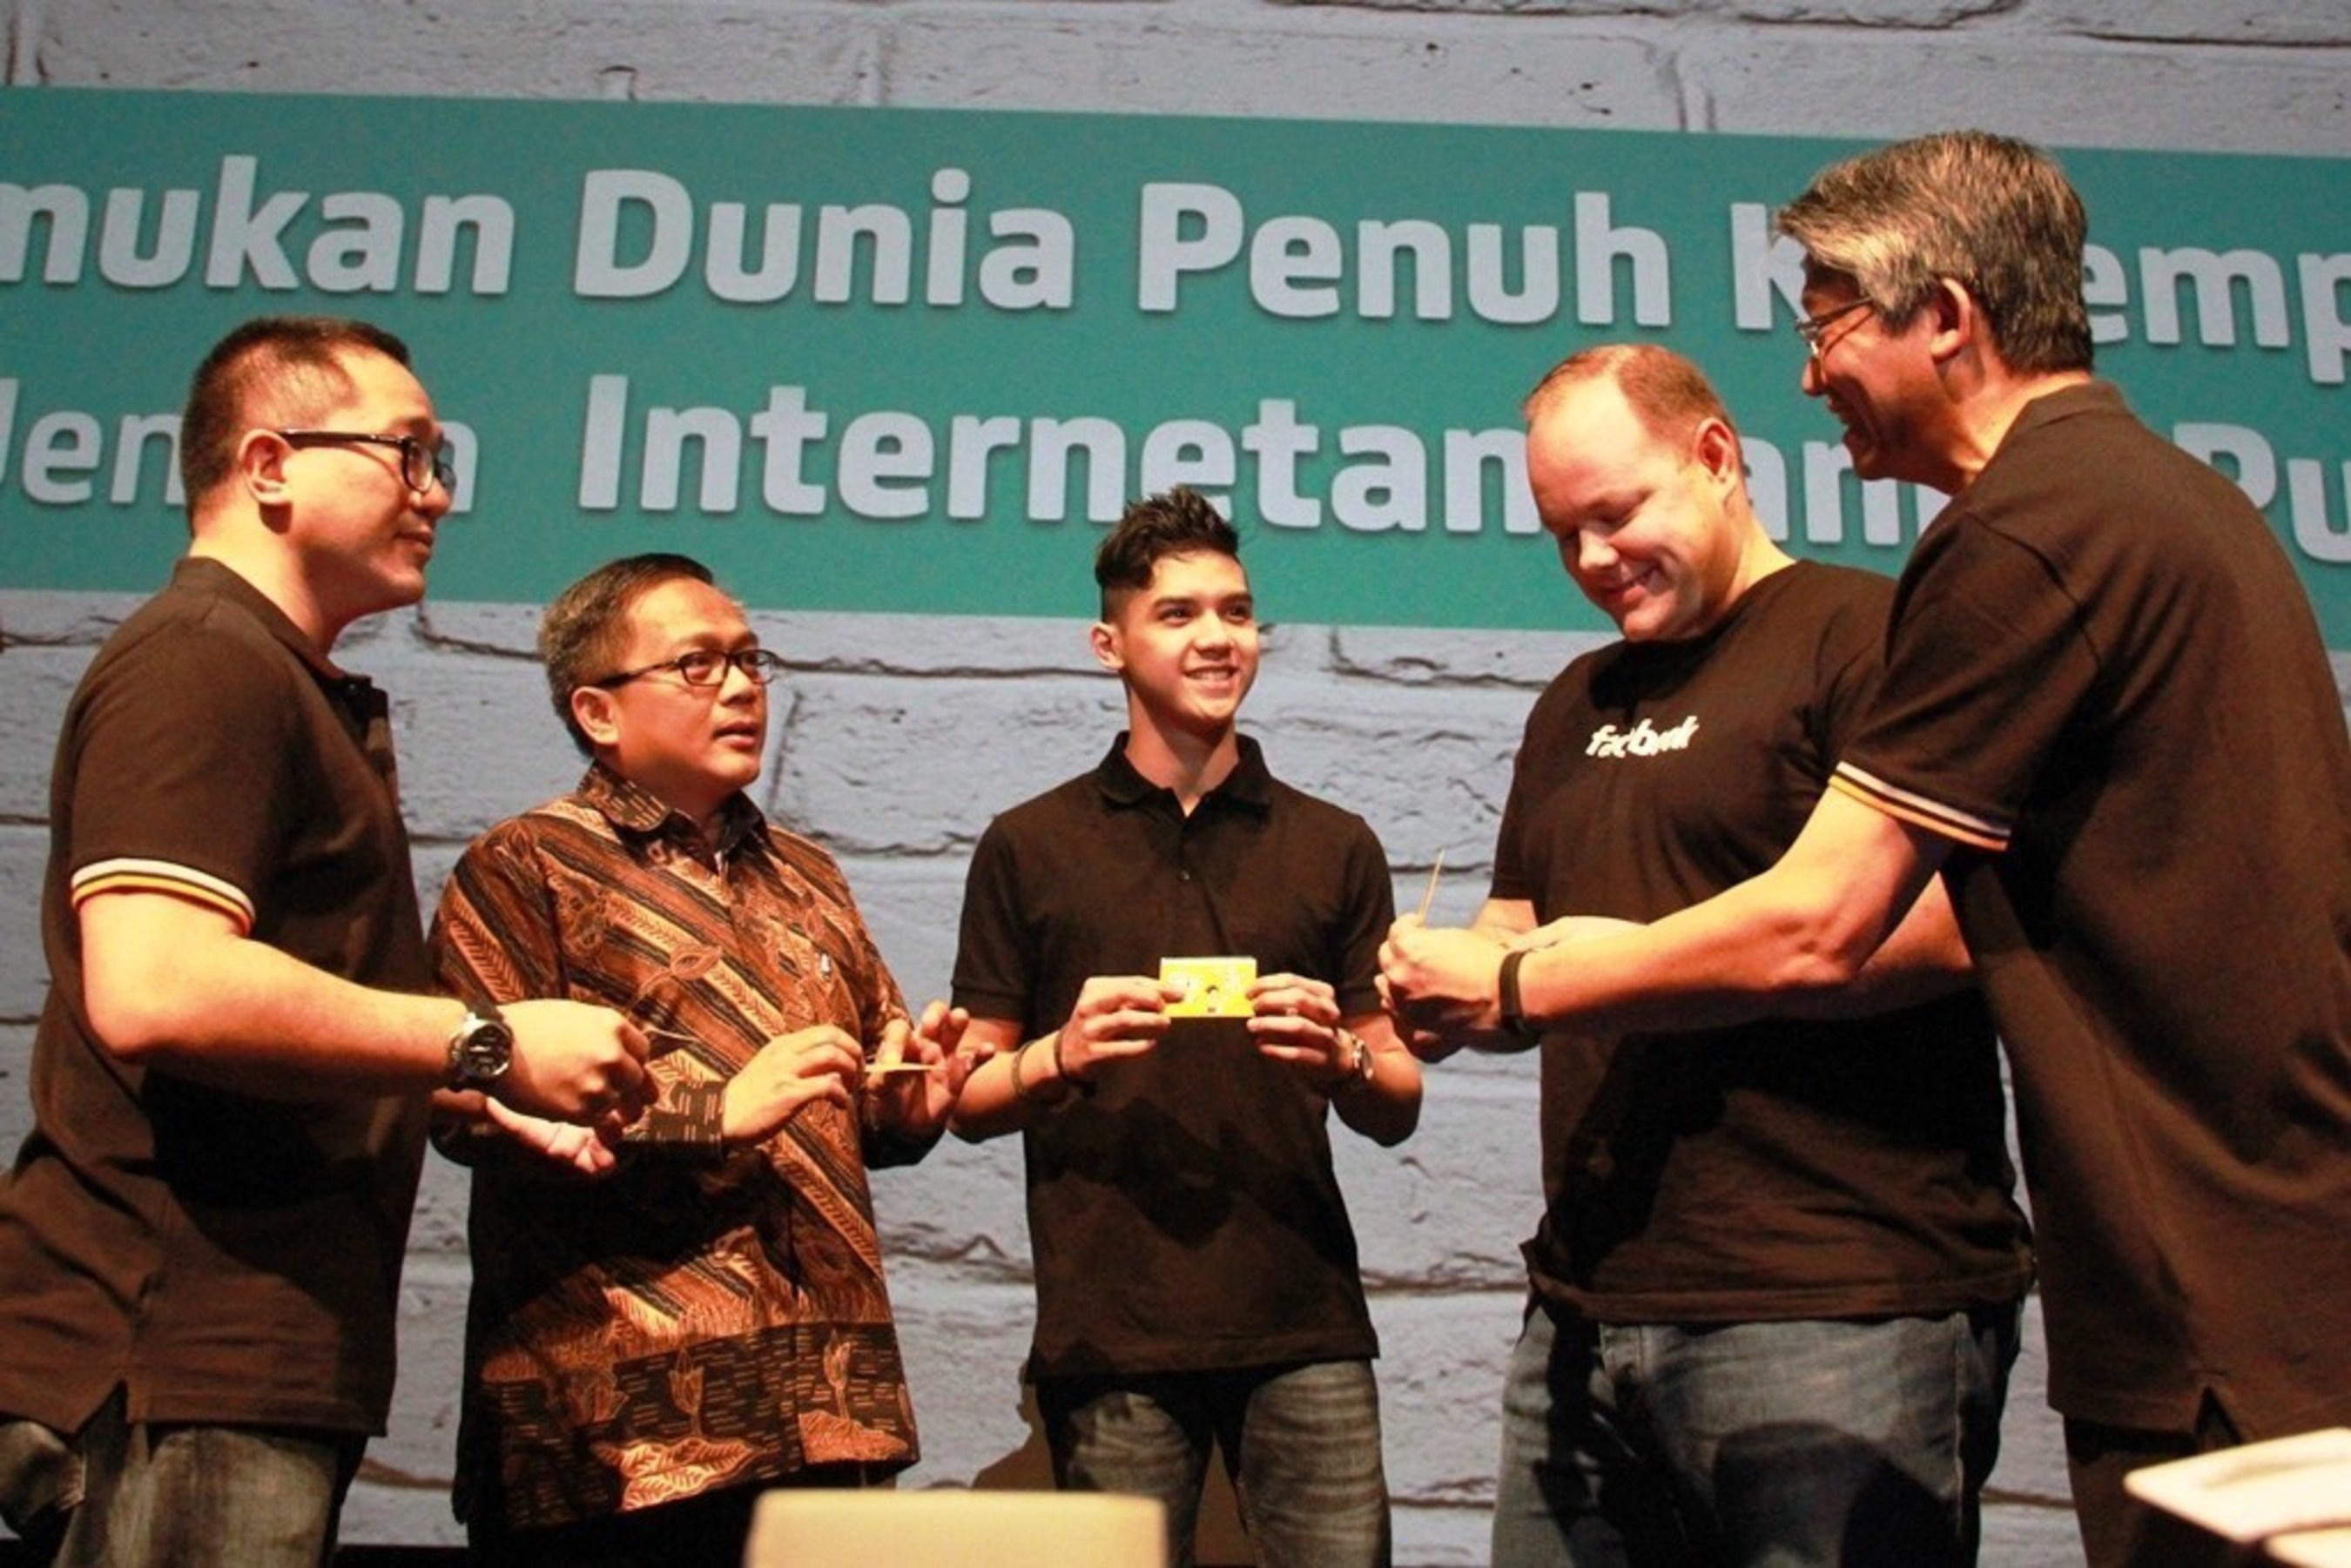 Ooredoo's Indosat and Facebook Launch Internet.org in Indonesia